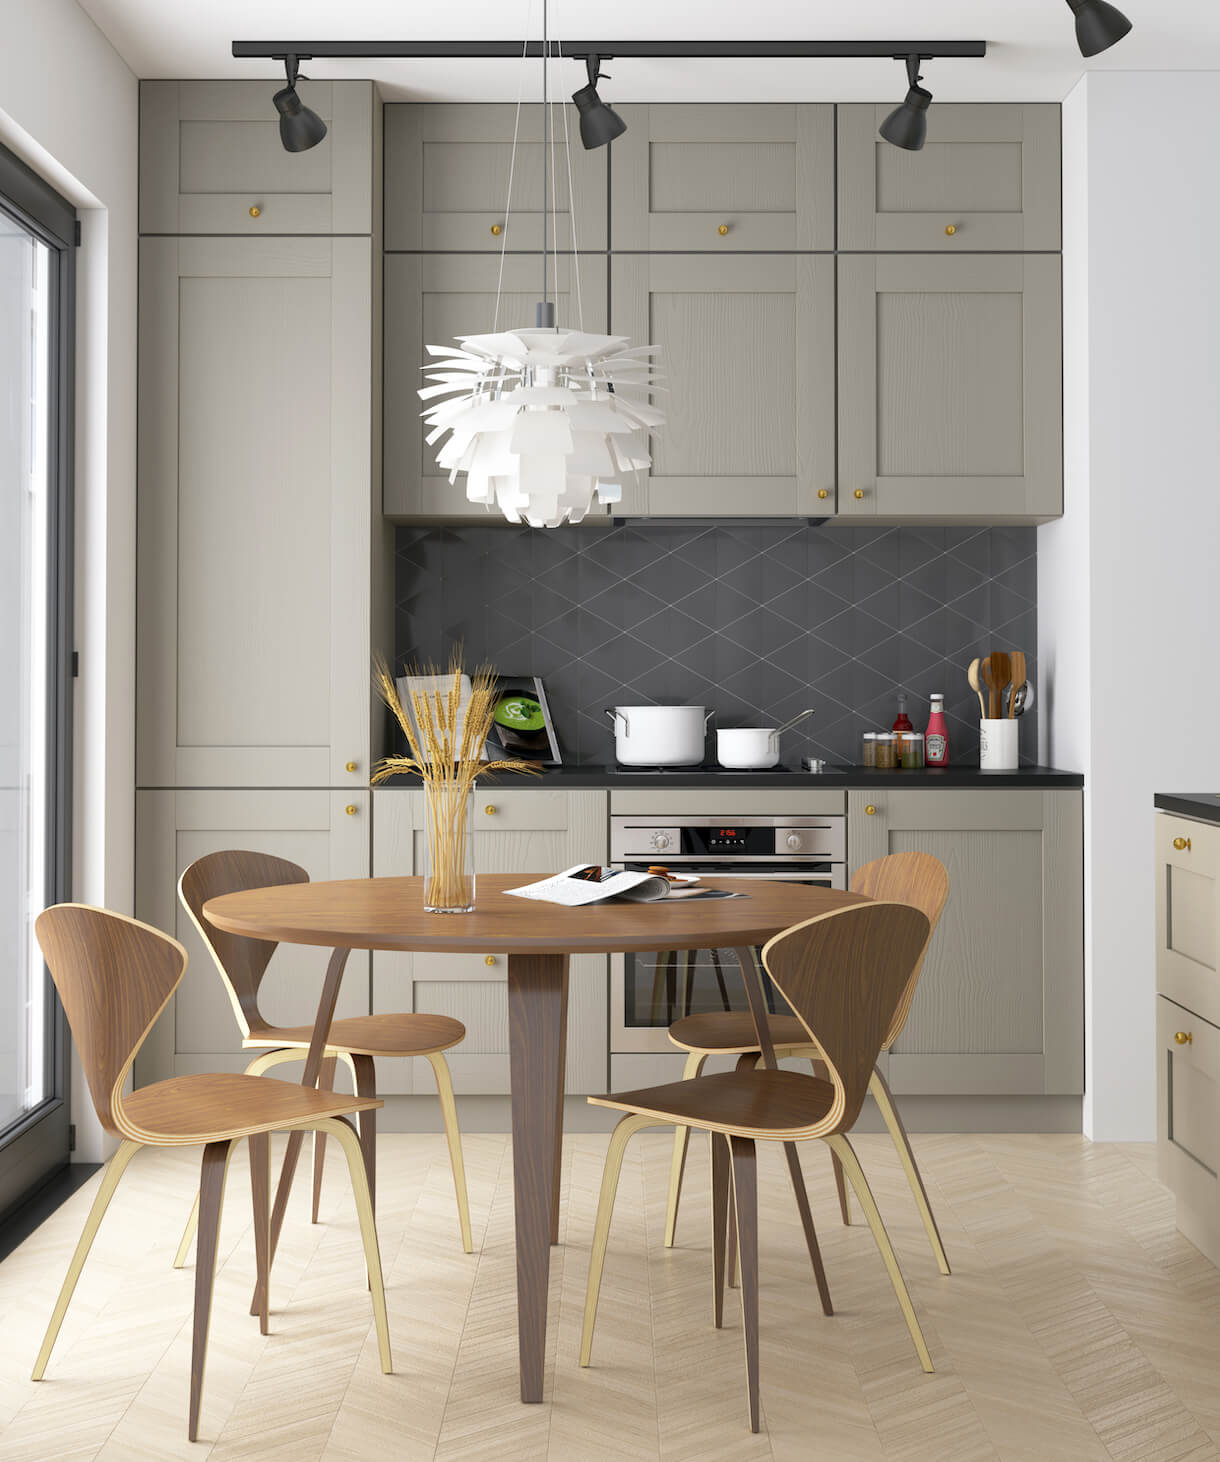 Classic Max kitchen fronts for IKEA